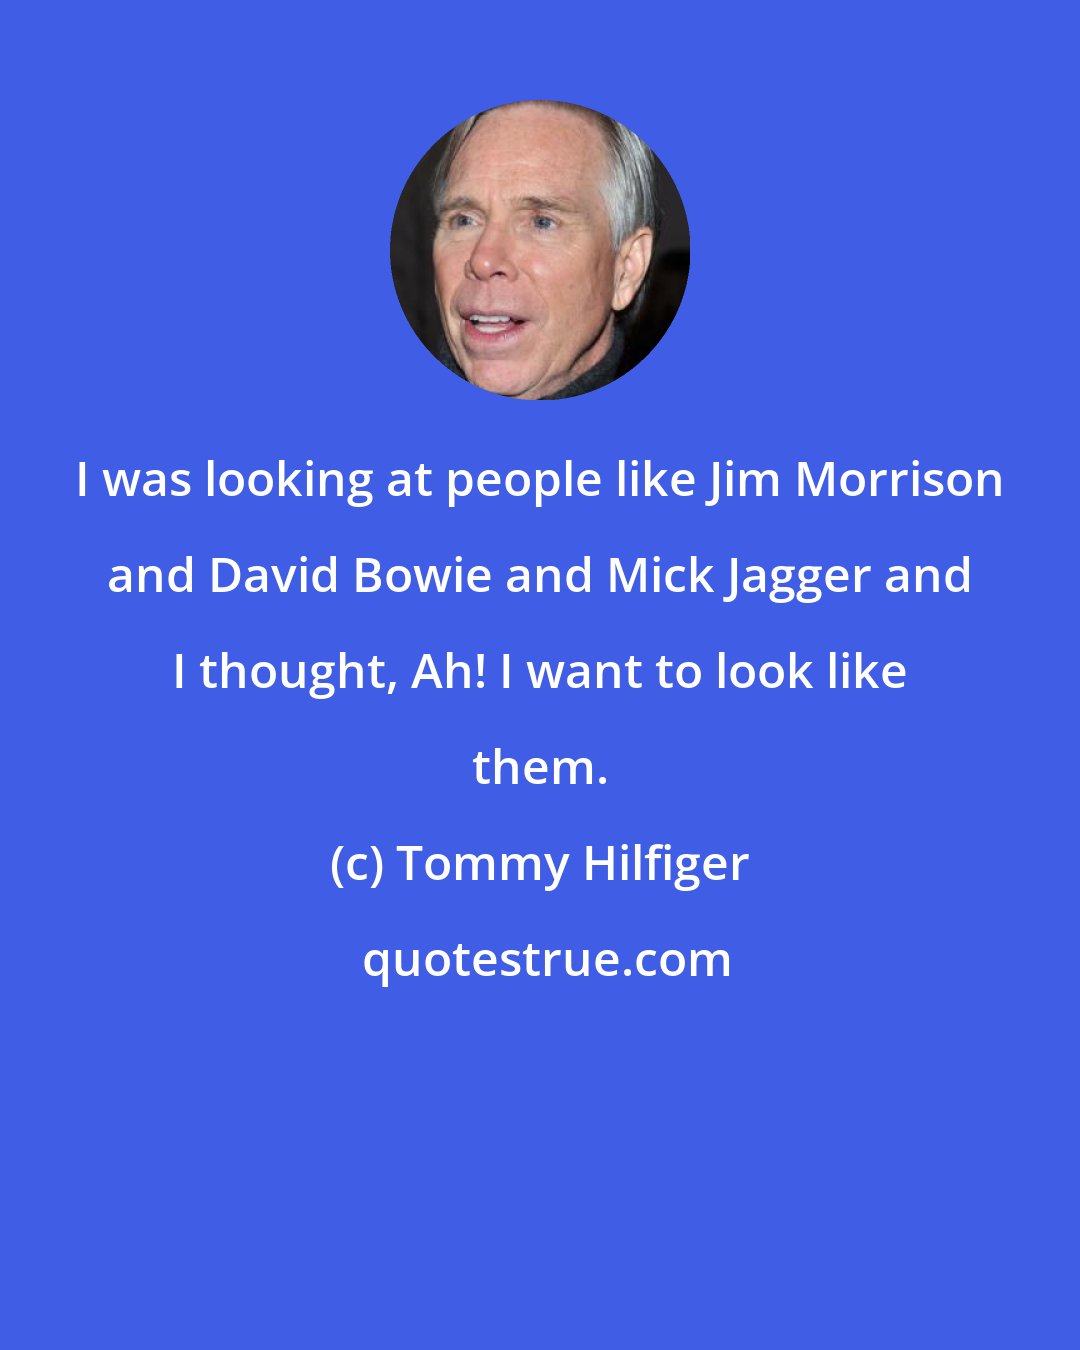 Tommy Hilfiger: I was looking at people like Jim Morrison and David Bowie and Mick Jagger and I thought, Ah! I want to look like them.